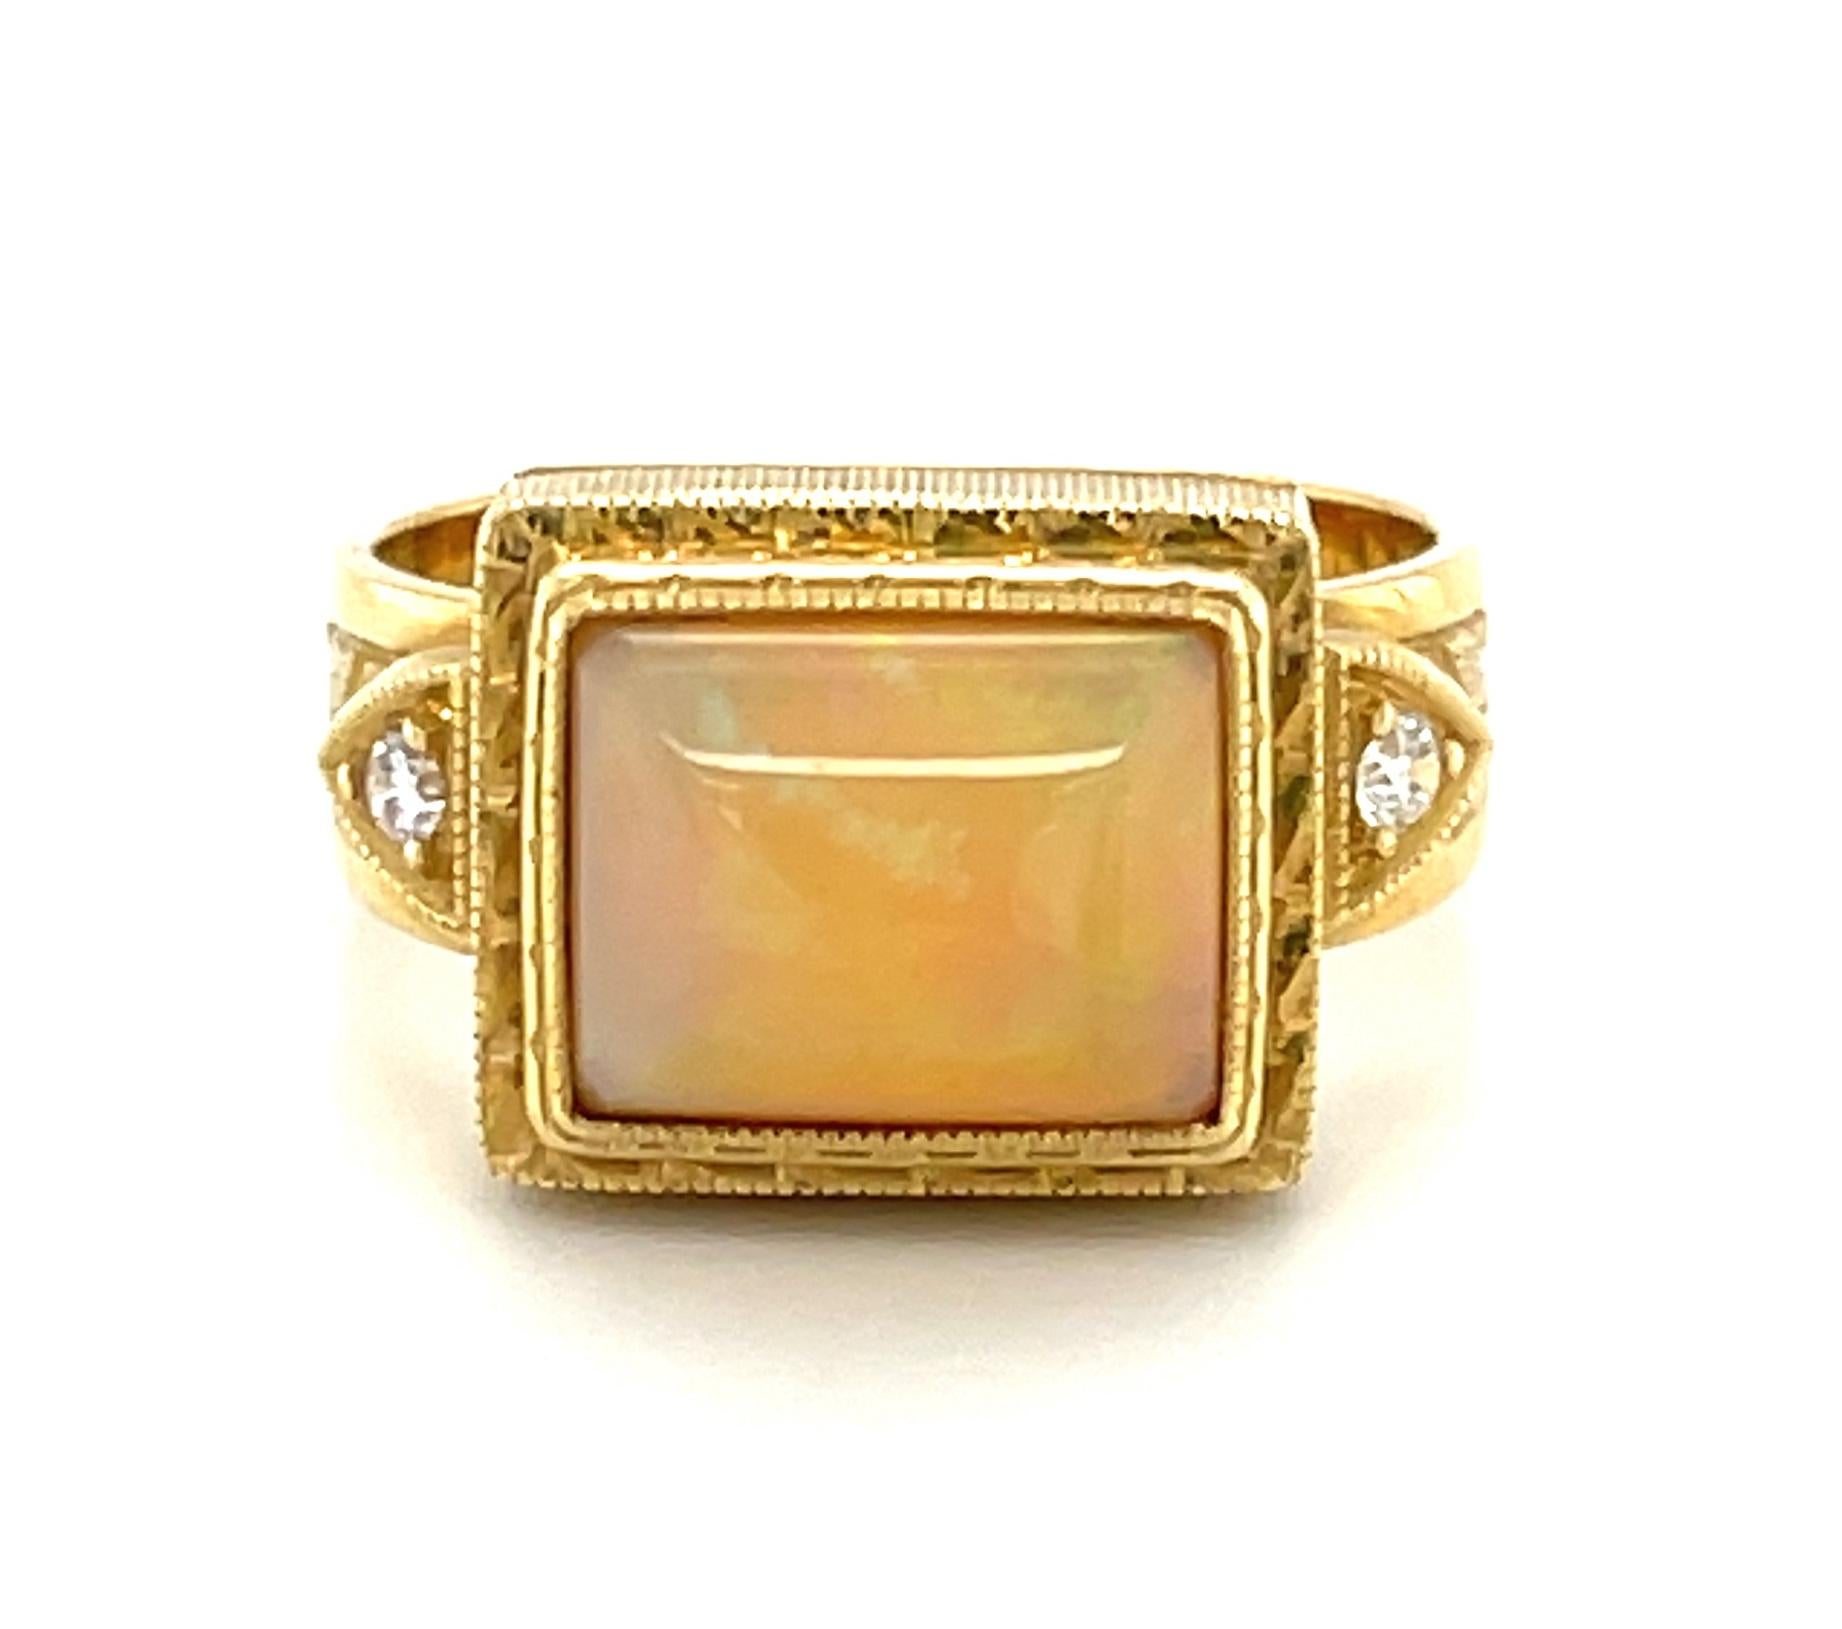 A bright and colorful 2.14 carat opal with an unusual rectangular cushion shape is featured in this handmade 18k yellow gold ring. The opal exhibits a variety of colors - predominately green, orange, yellow, and red, with subtle flashes of turquoise